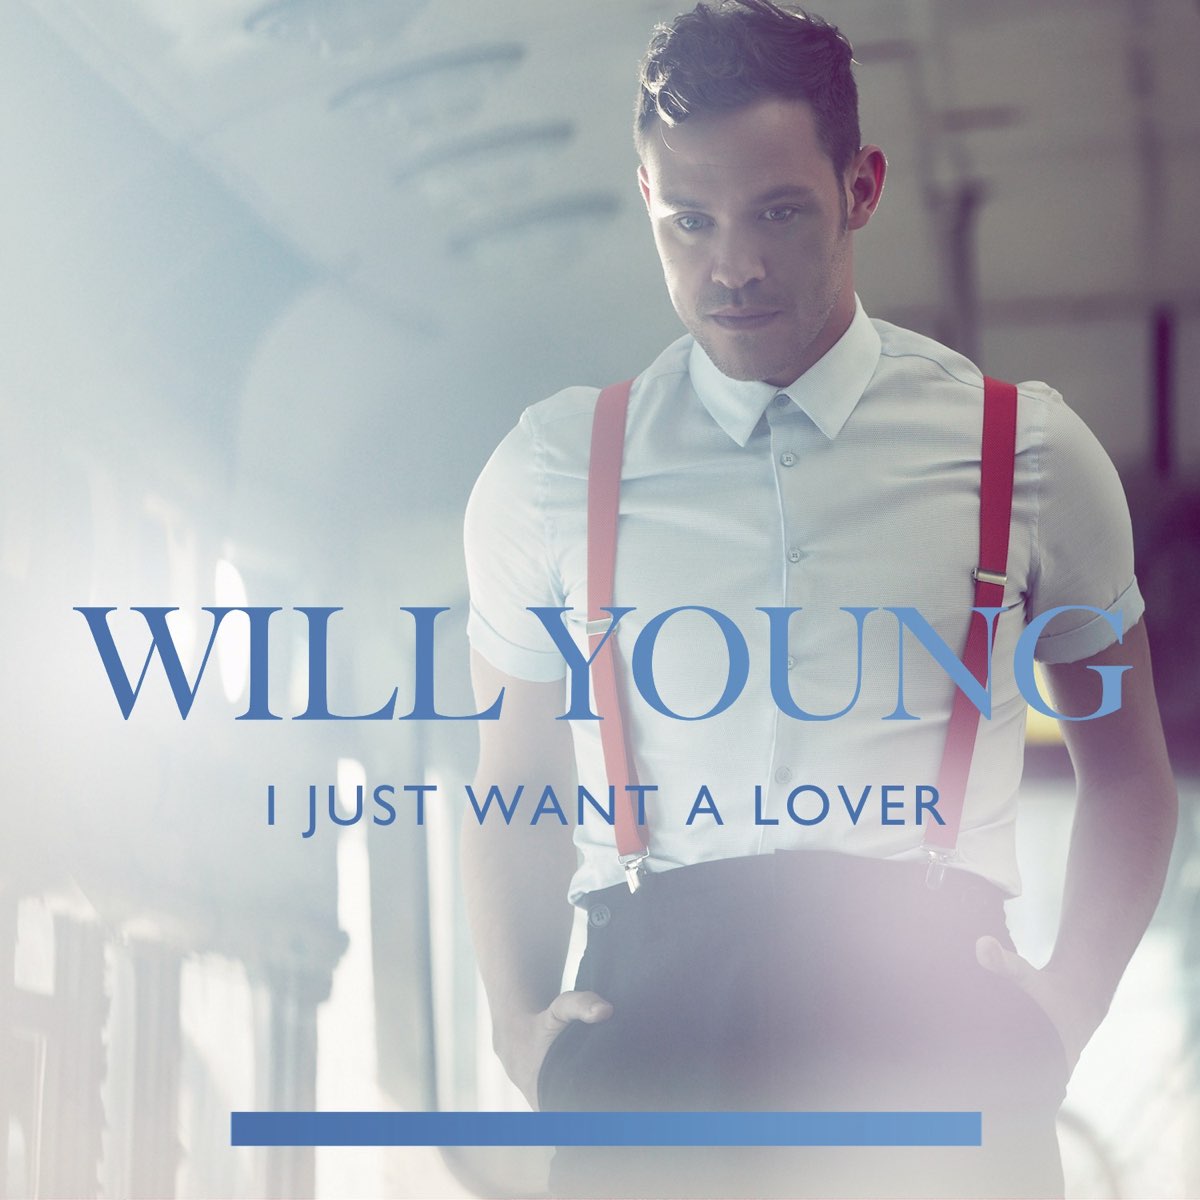 Will young i just want a lover. Lover певец. Will young обложки альбомы. Ловер исполнитель фото.